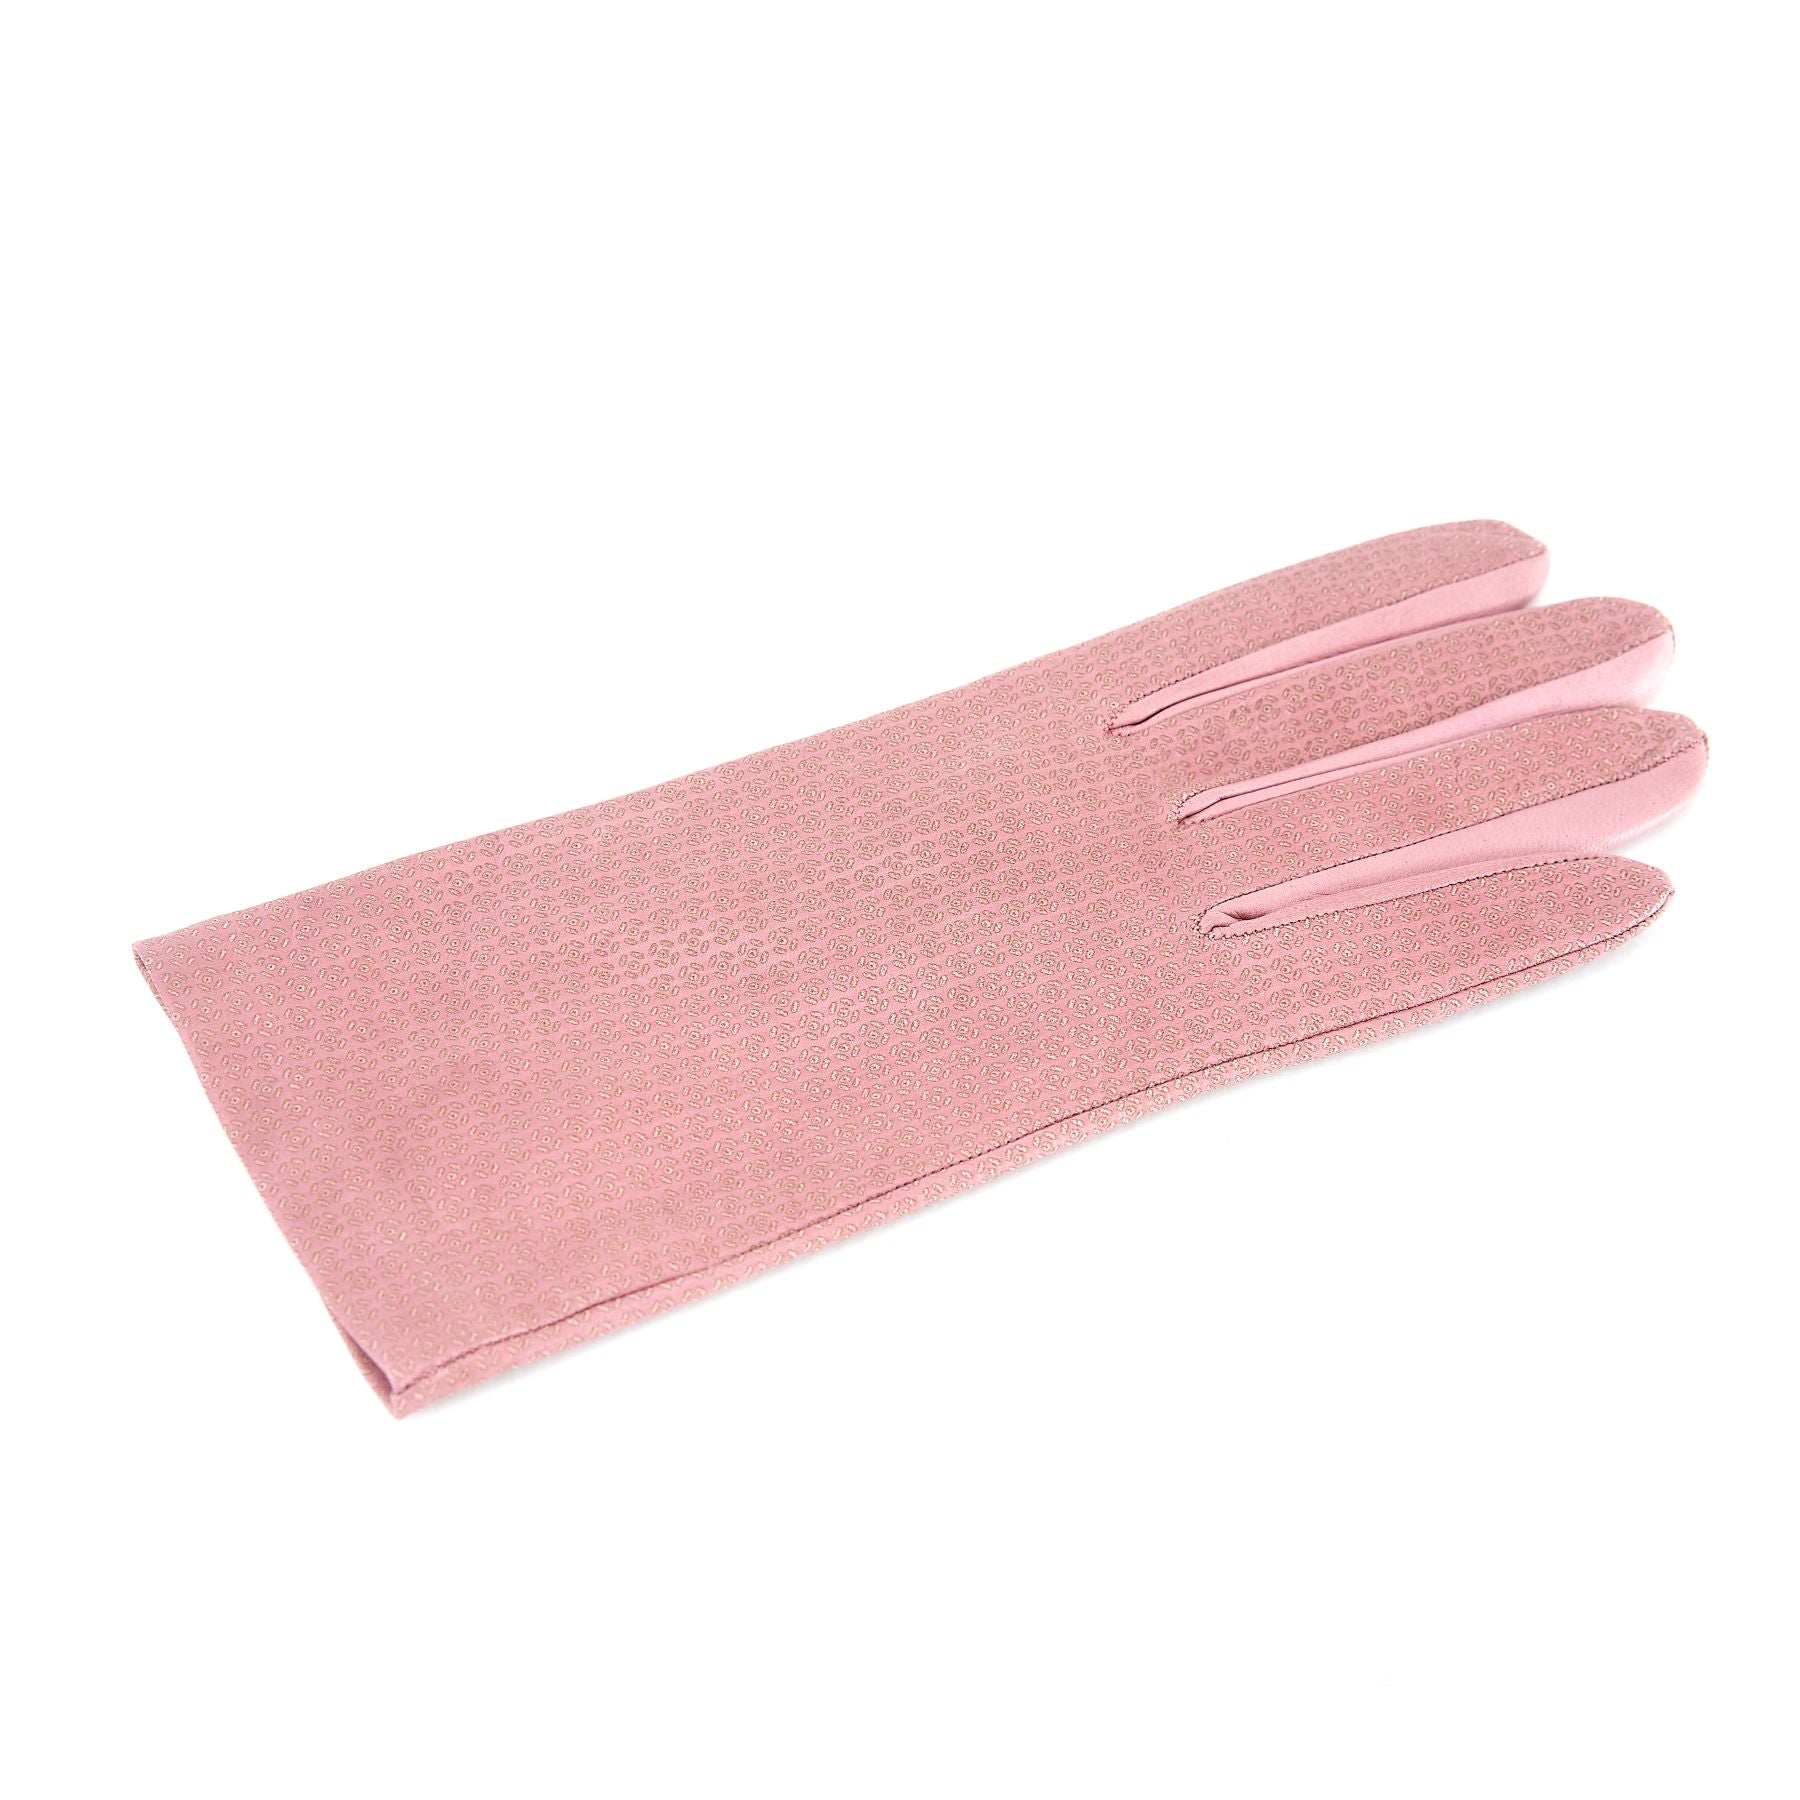 Women's unlined pink nappa leather gloves with all over laser cut detail